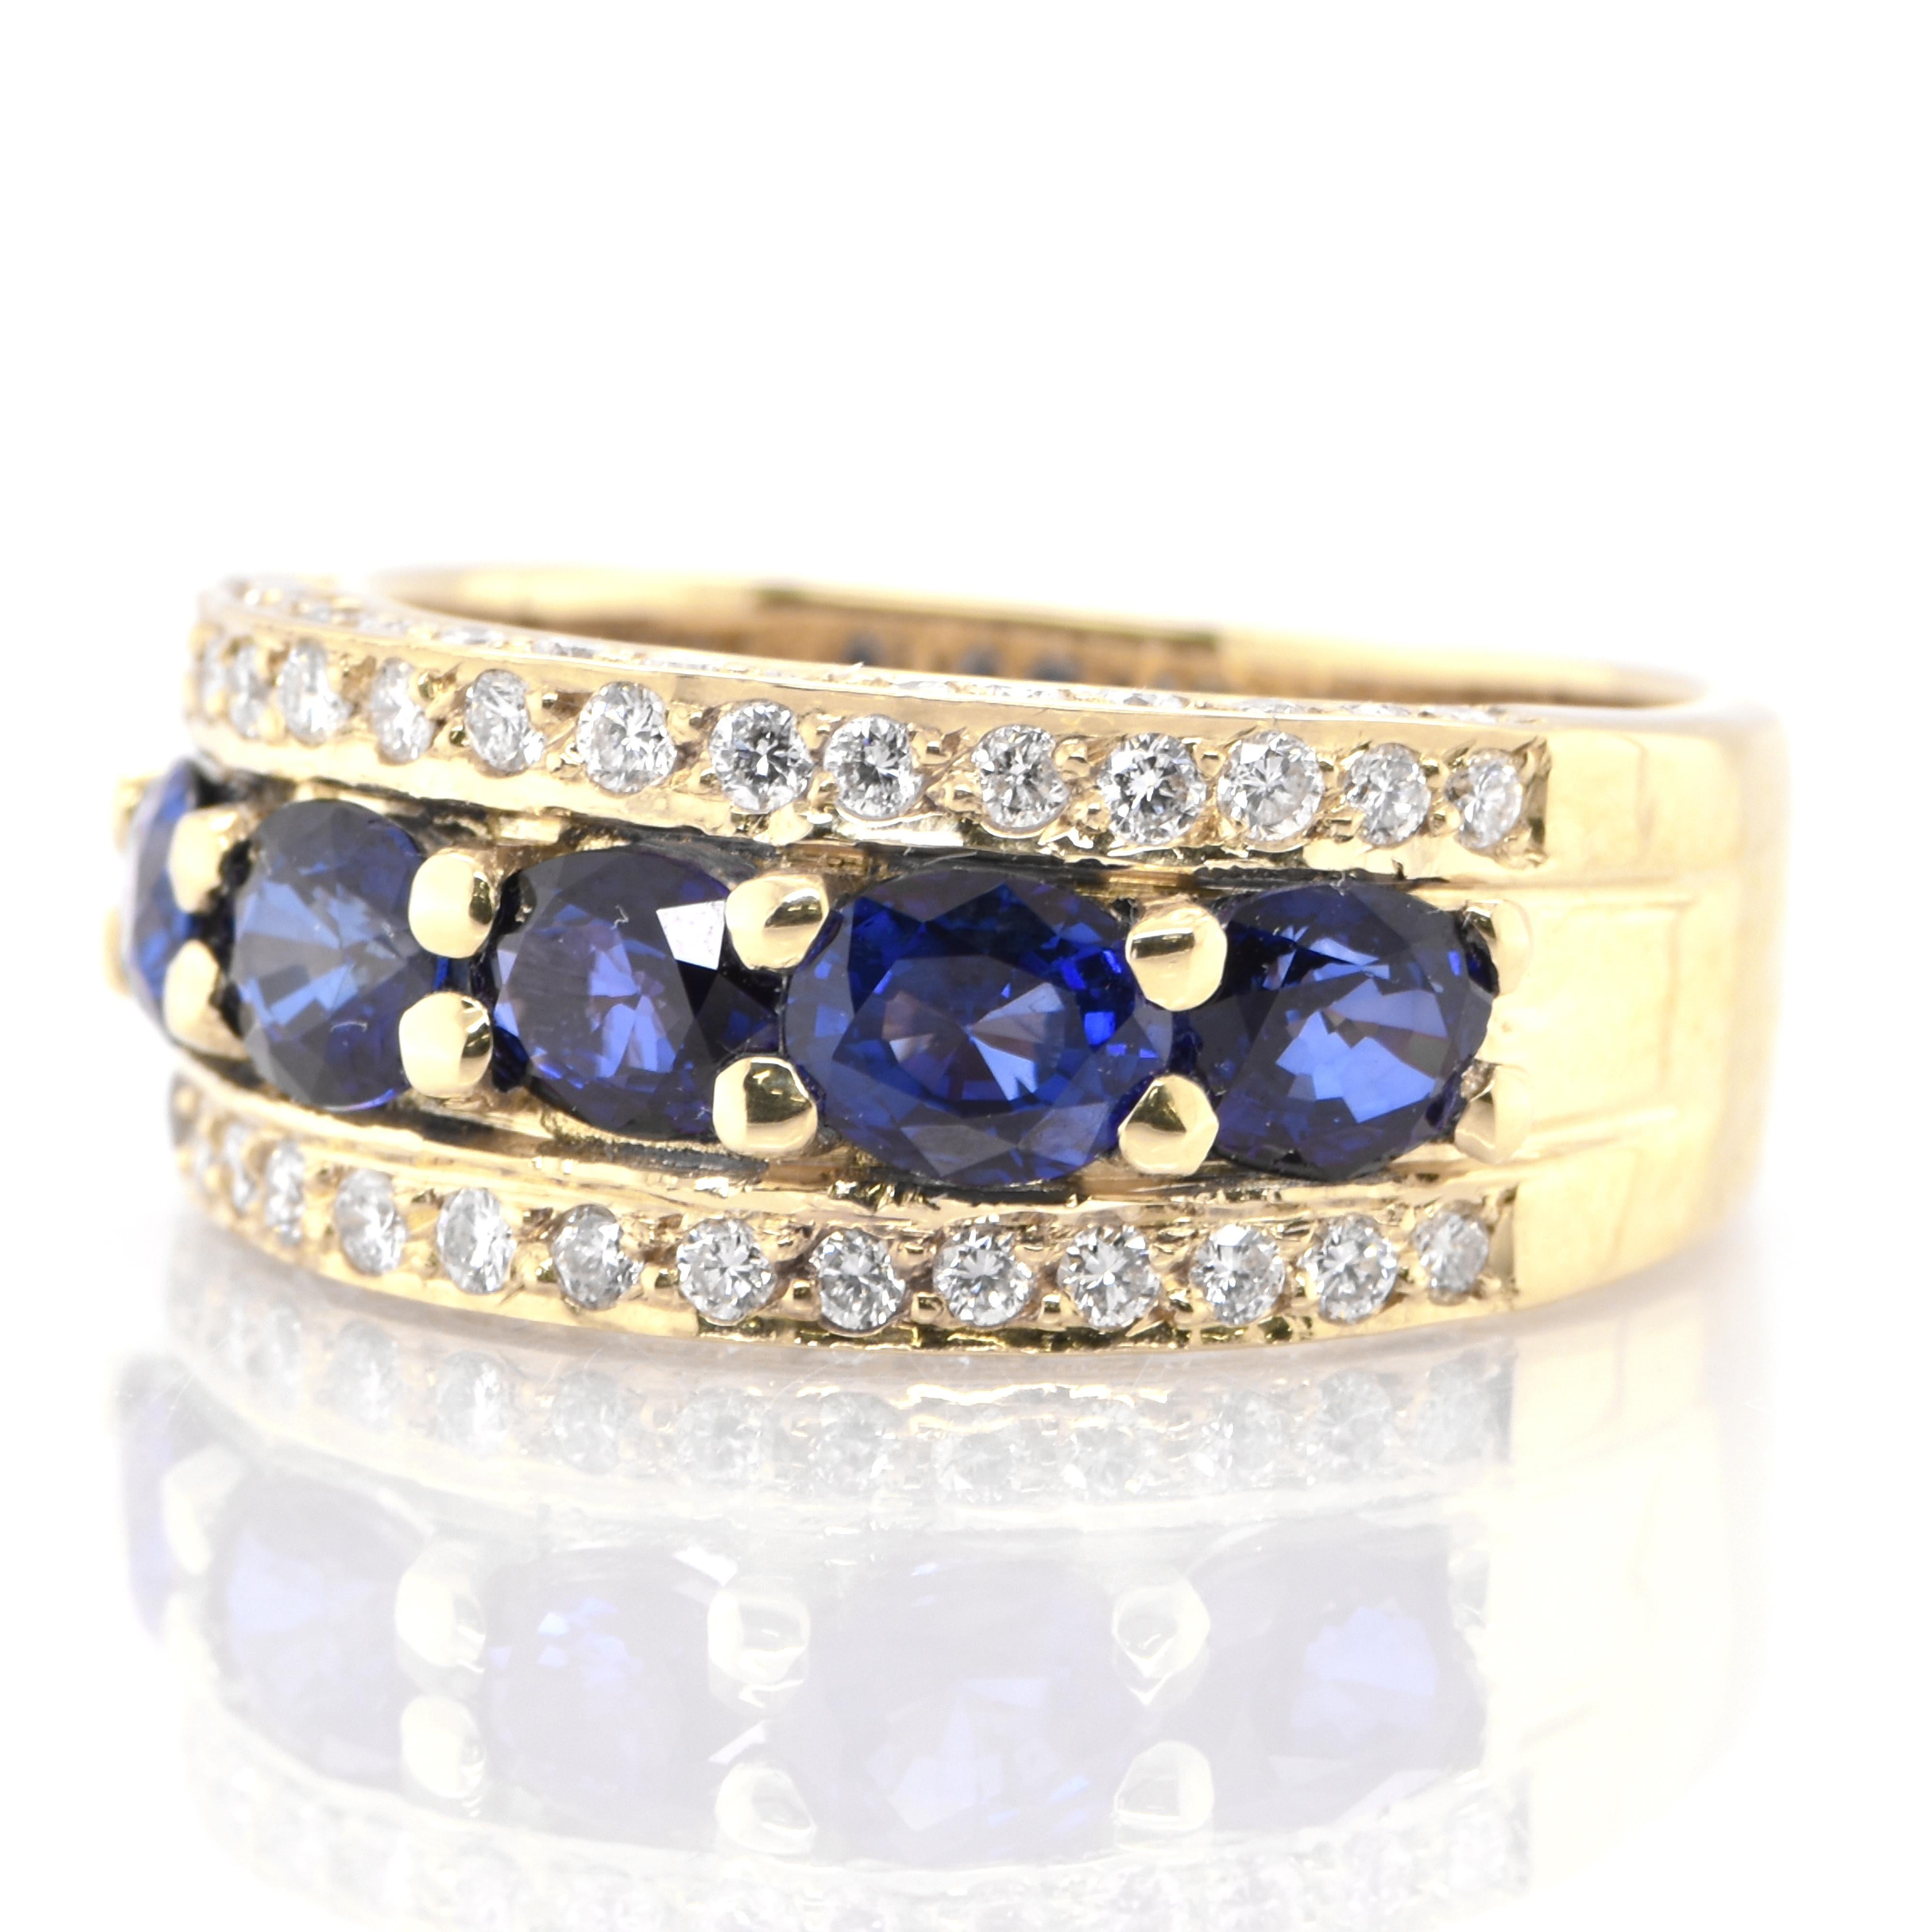 A beautiful half eternity band ring featuring Natural Oval Cut Sapphires and Diamond Accents set in 18K Yellow Gold. Sapphires have extraordinary durability - they excel in hardness as well as toughness and durability making them very popular in